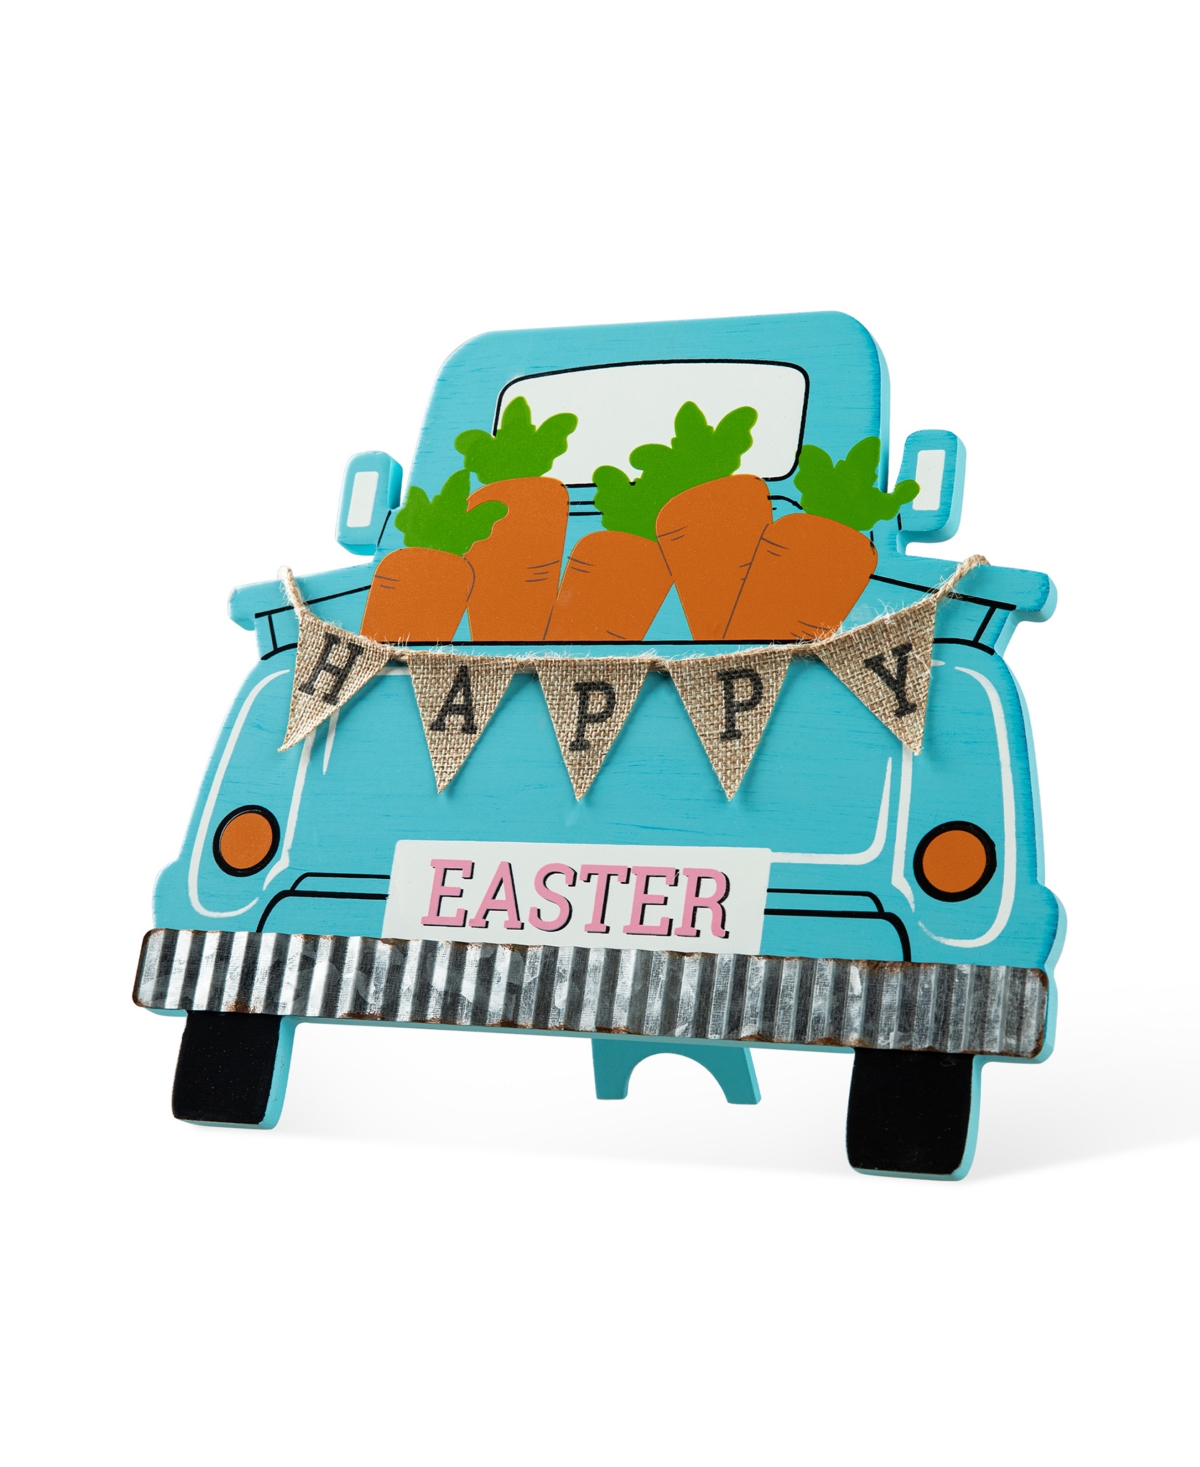 Glitzhome 11.5" L Easter Wooden Truck Table Decor In Blue